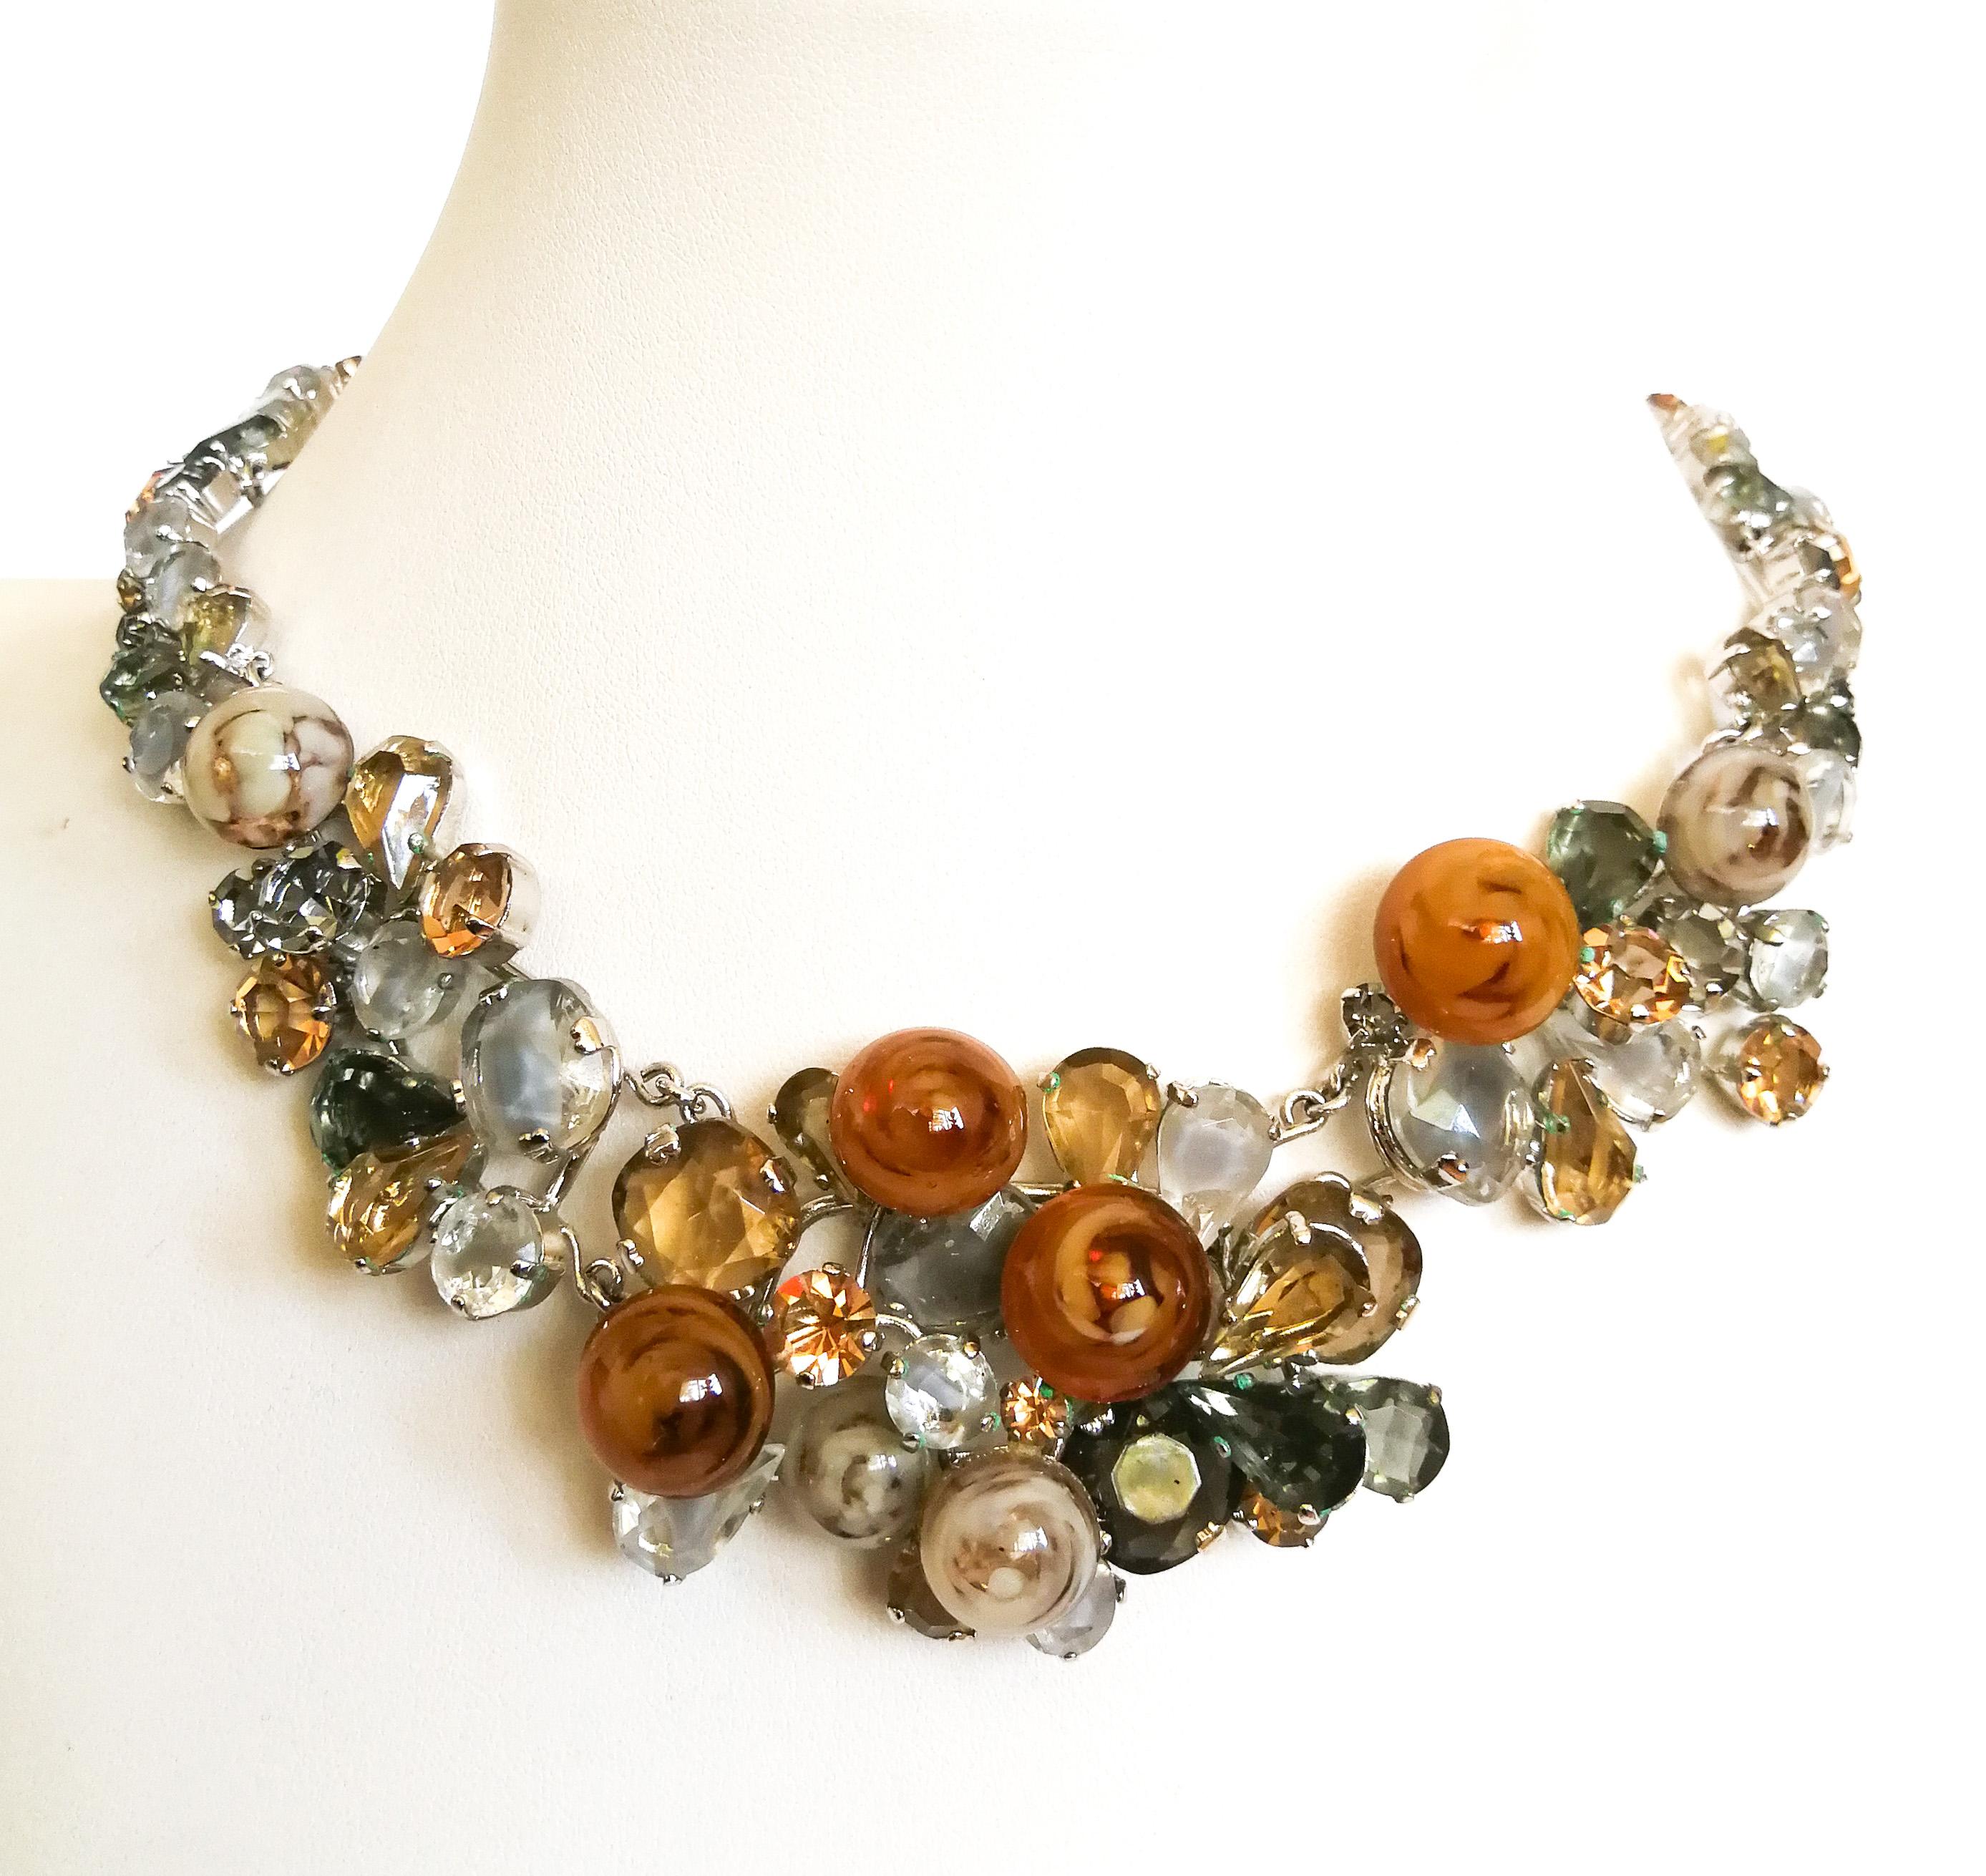 A very rare and important necklace from 1958, designed by Yves Saint Laurent, during the first year of his tenure at the House of Dior. Formed of swirled glass 'buttons' or 'bubbles' which sit atop of a melange of shaped pastes in subtle and soft